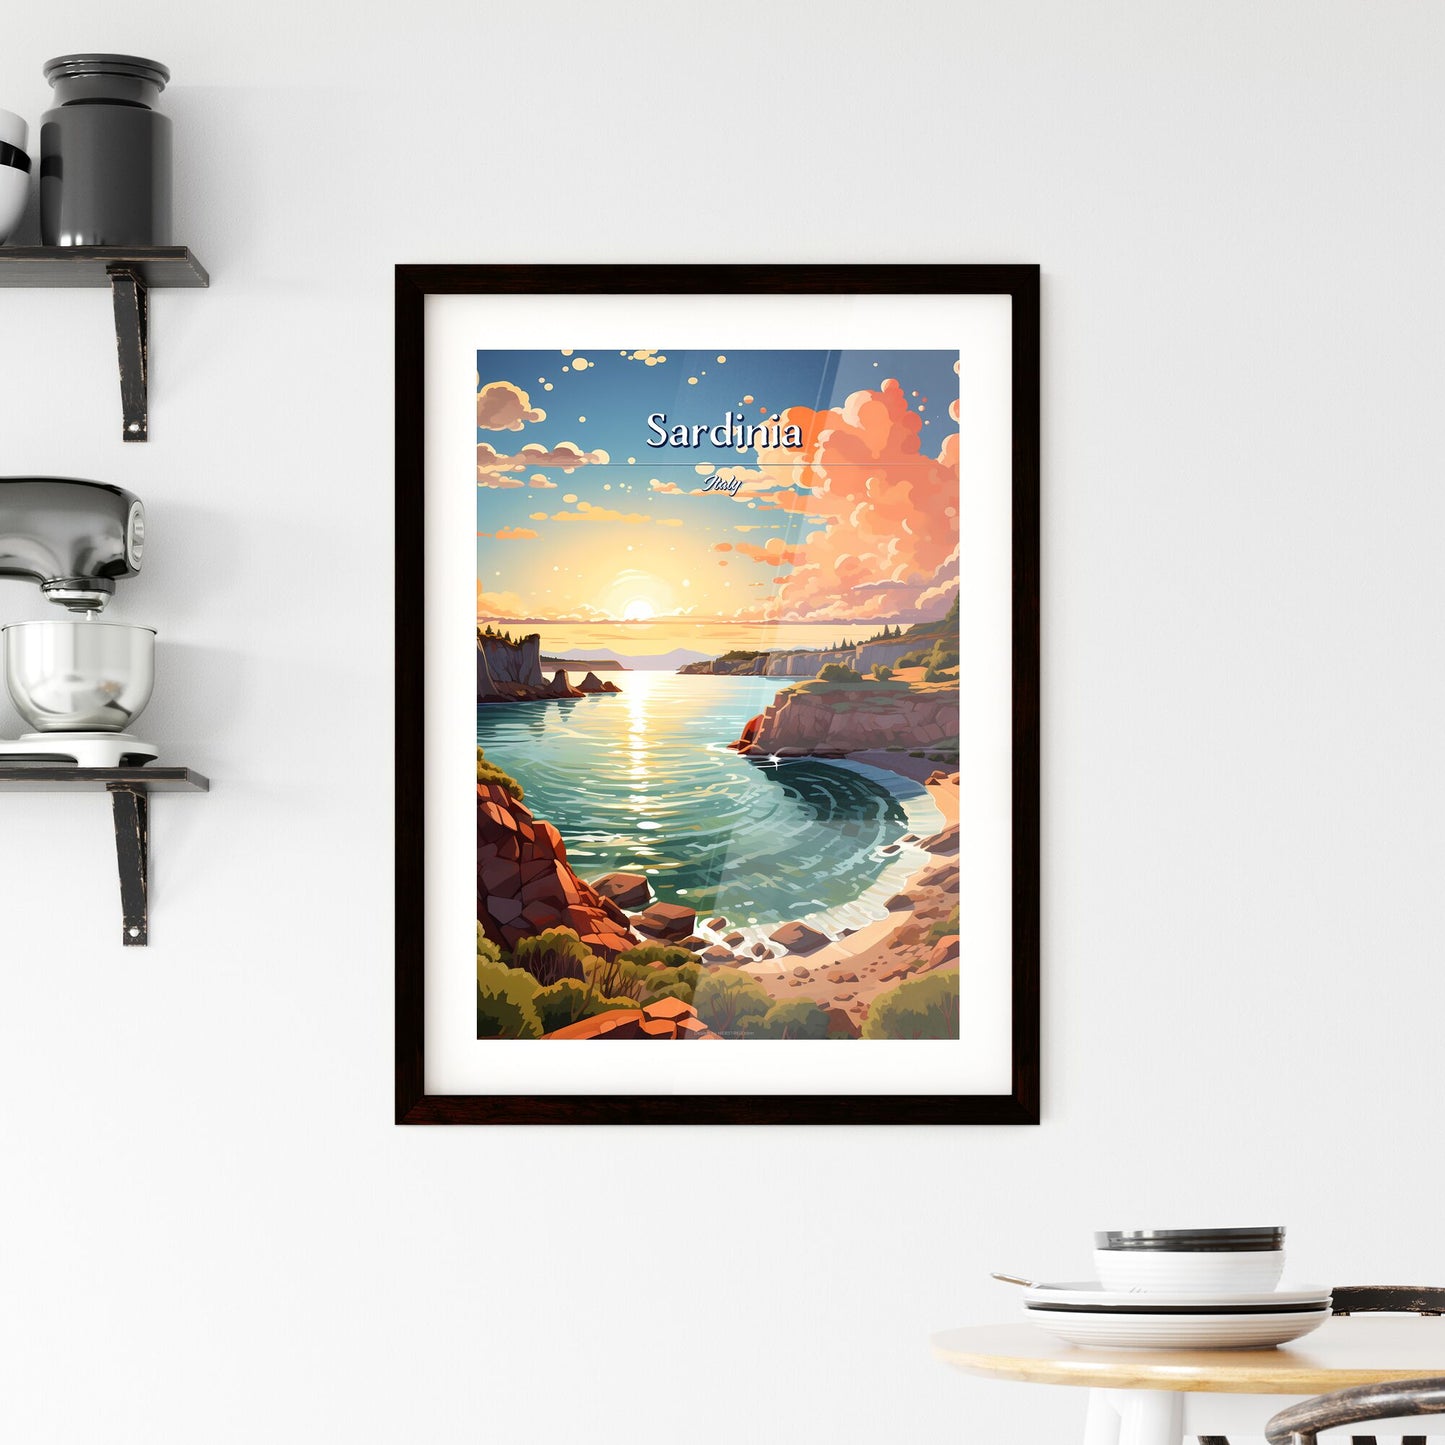 Sardinia, Italy - Art print of a landscape of a body of water with a rocky beach and trees Default Title